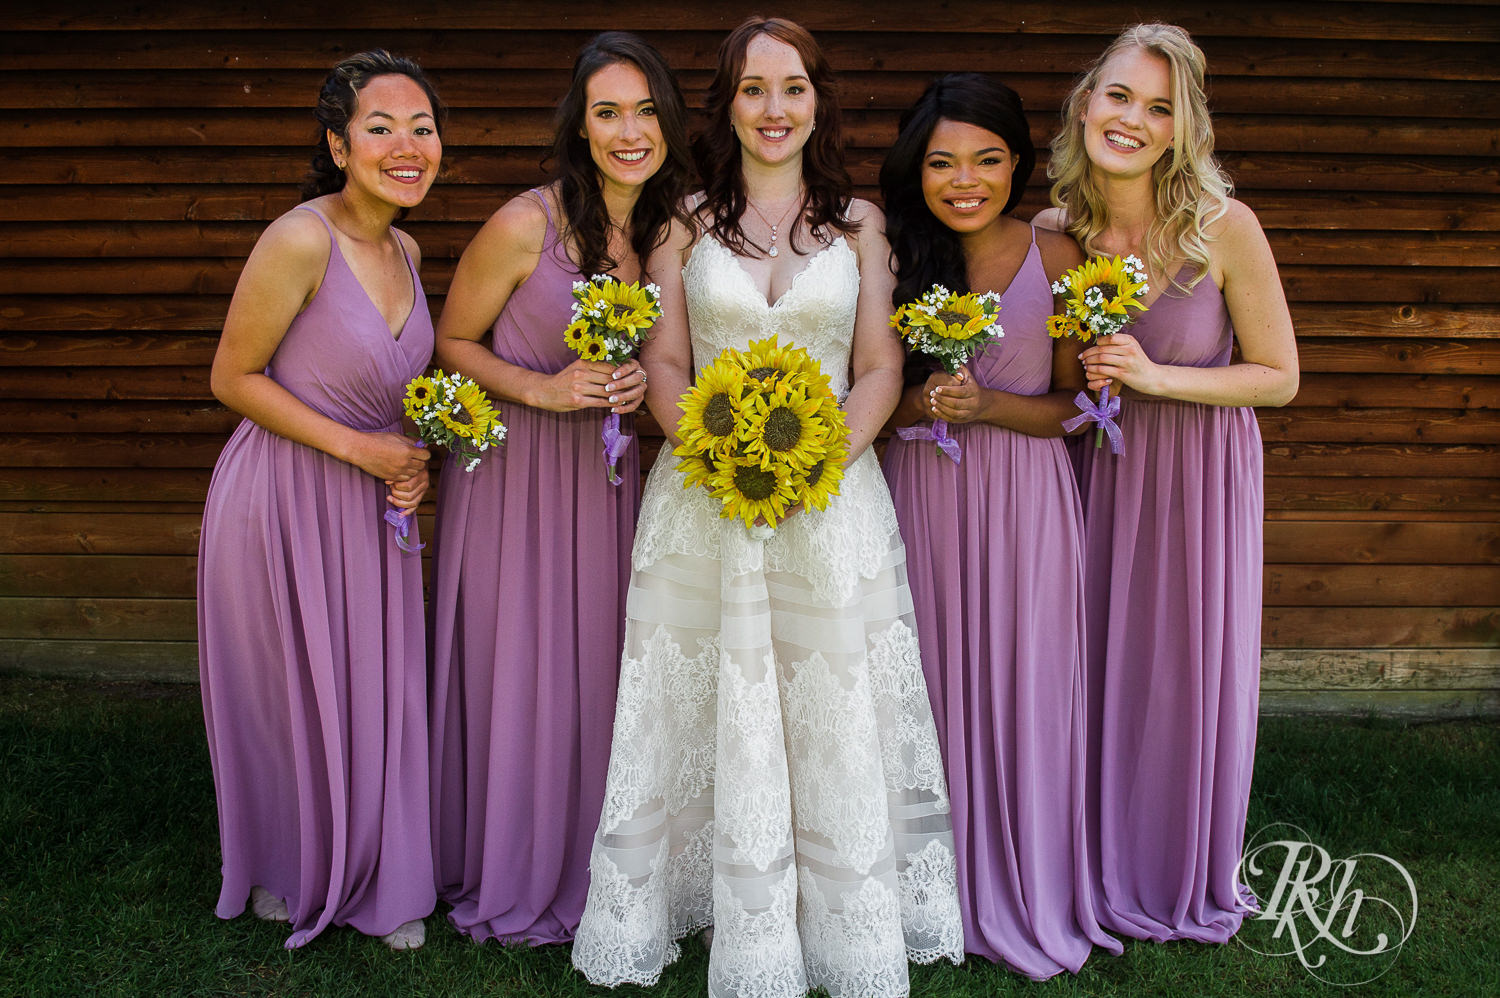 Wedding party smiles holding sunflowers during barn wedding at Birch Hill Barn in Glenwood City, Wisconsin.